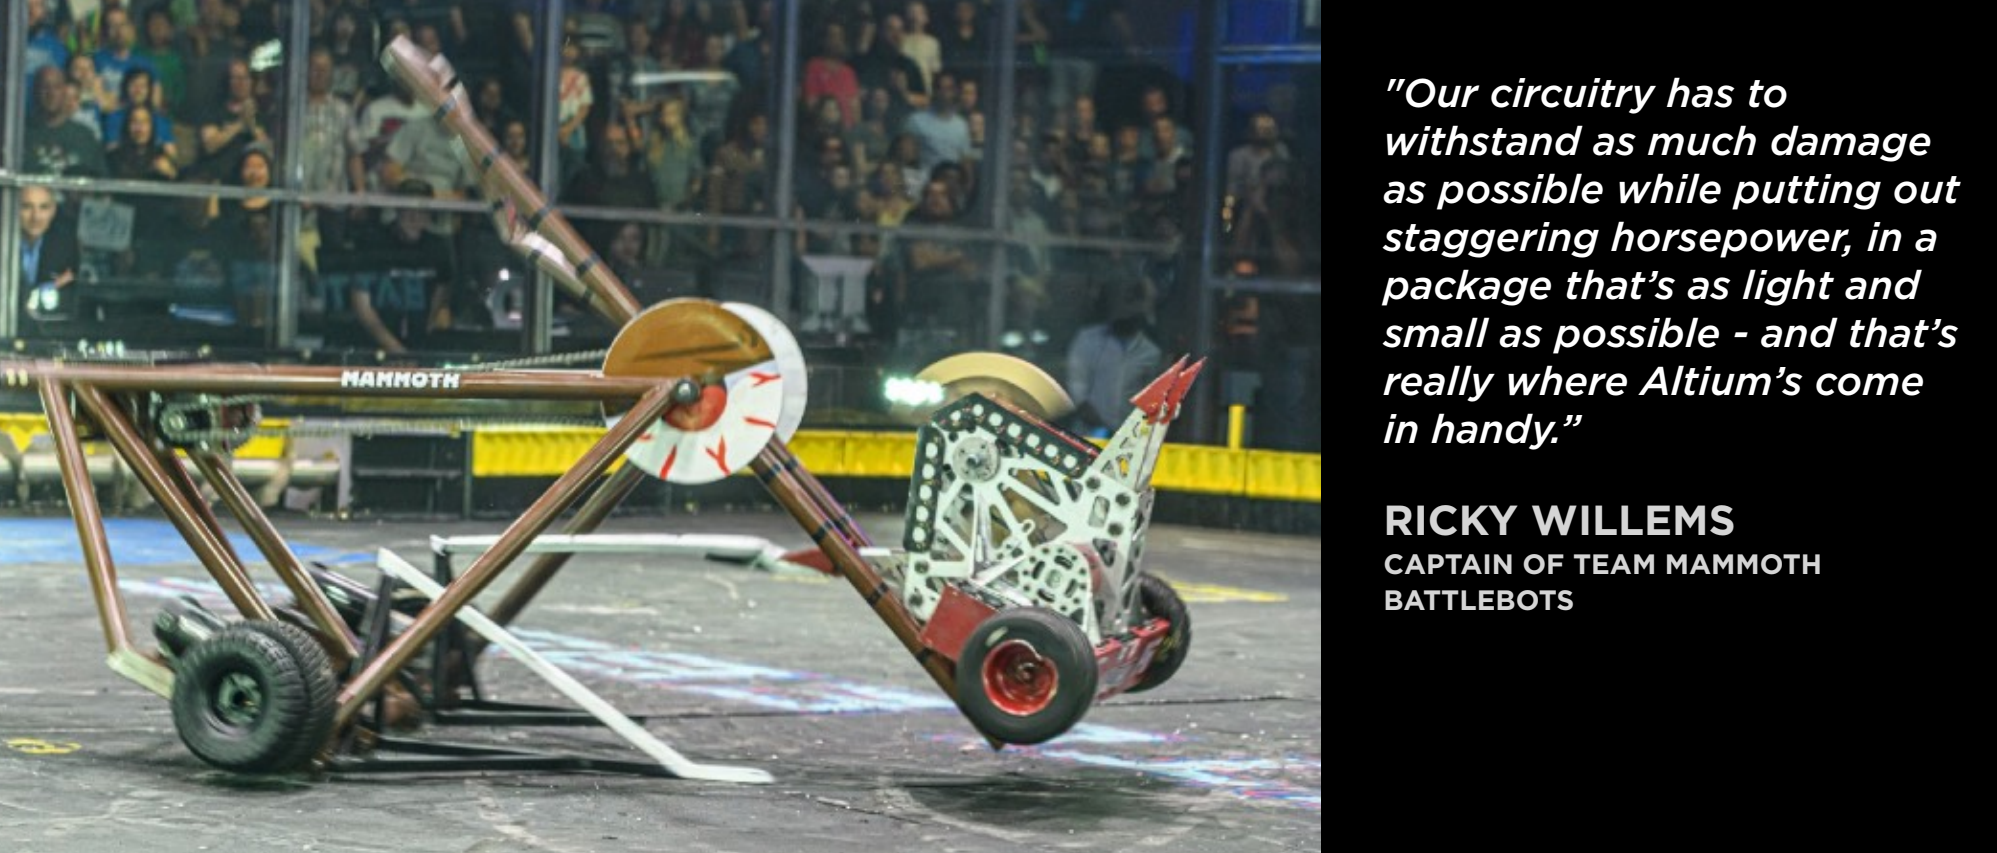 circuitry in battle bots has to withstand damages while putting out staggering horsepower